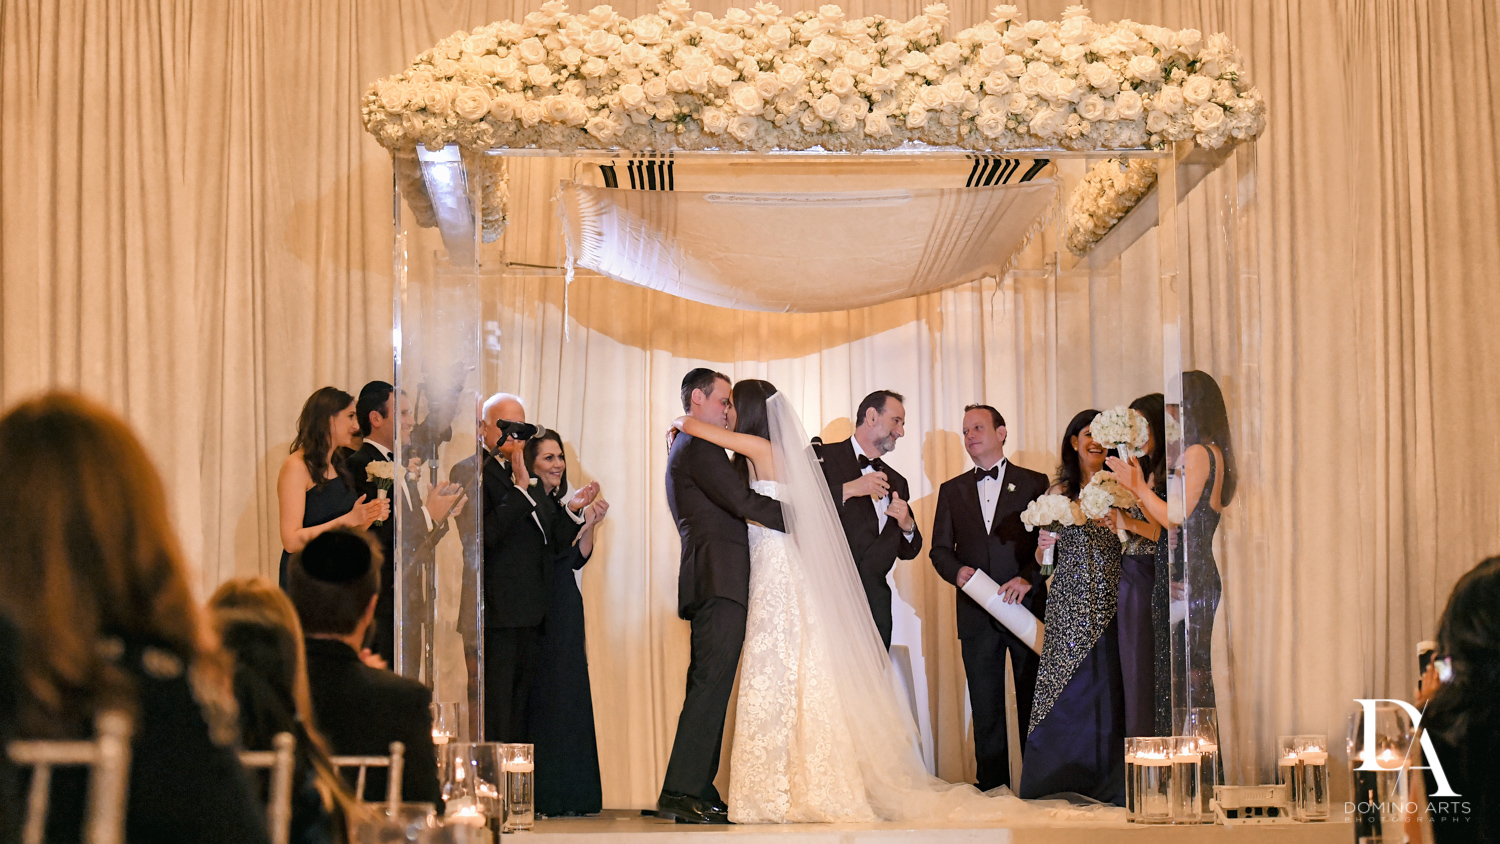 wedding kiss at A Ritz Carlton Wedding in Key Biscayne by Domino Arts Photography